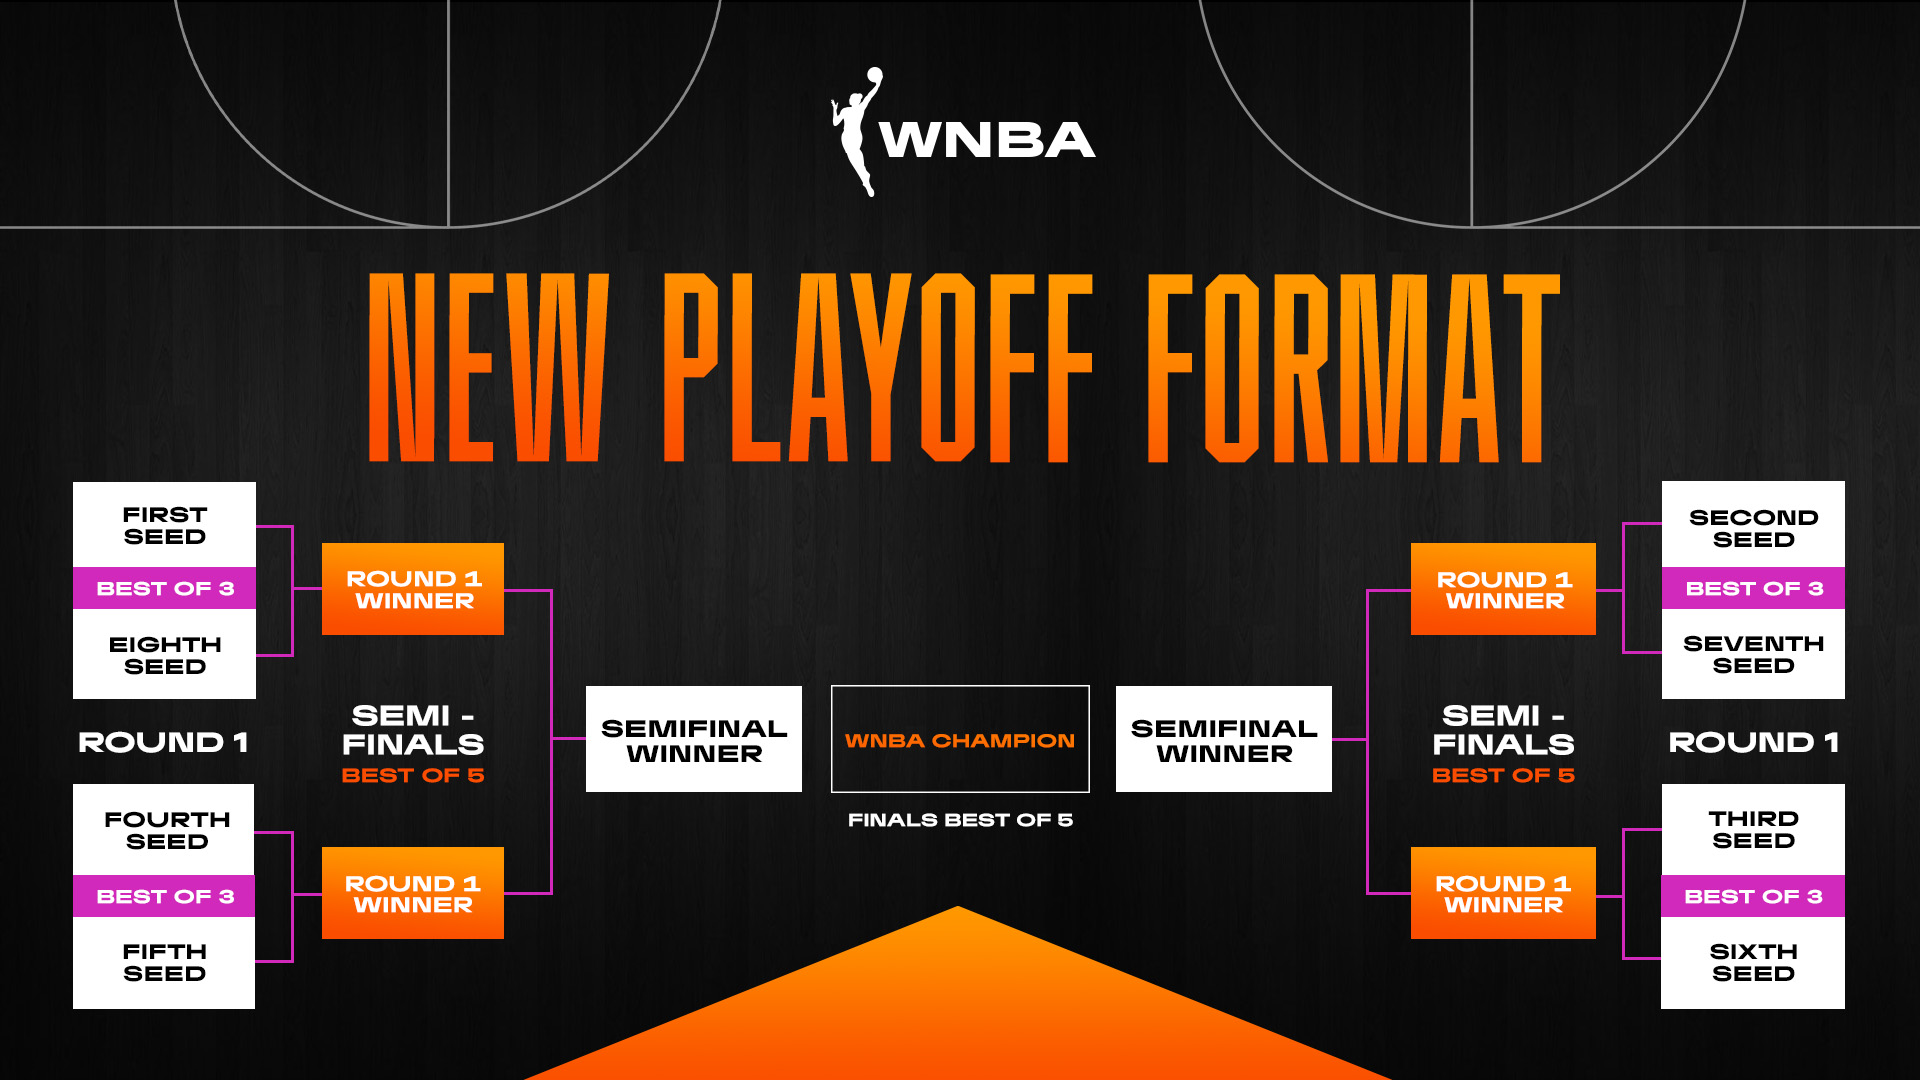 WNBA APPROVES NEW PLAYOFF FORMAT Ballin Down South